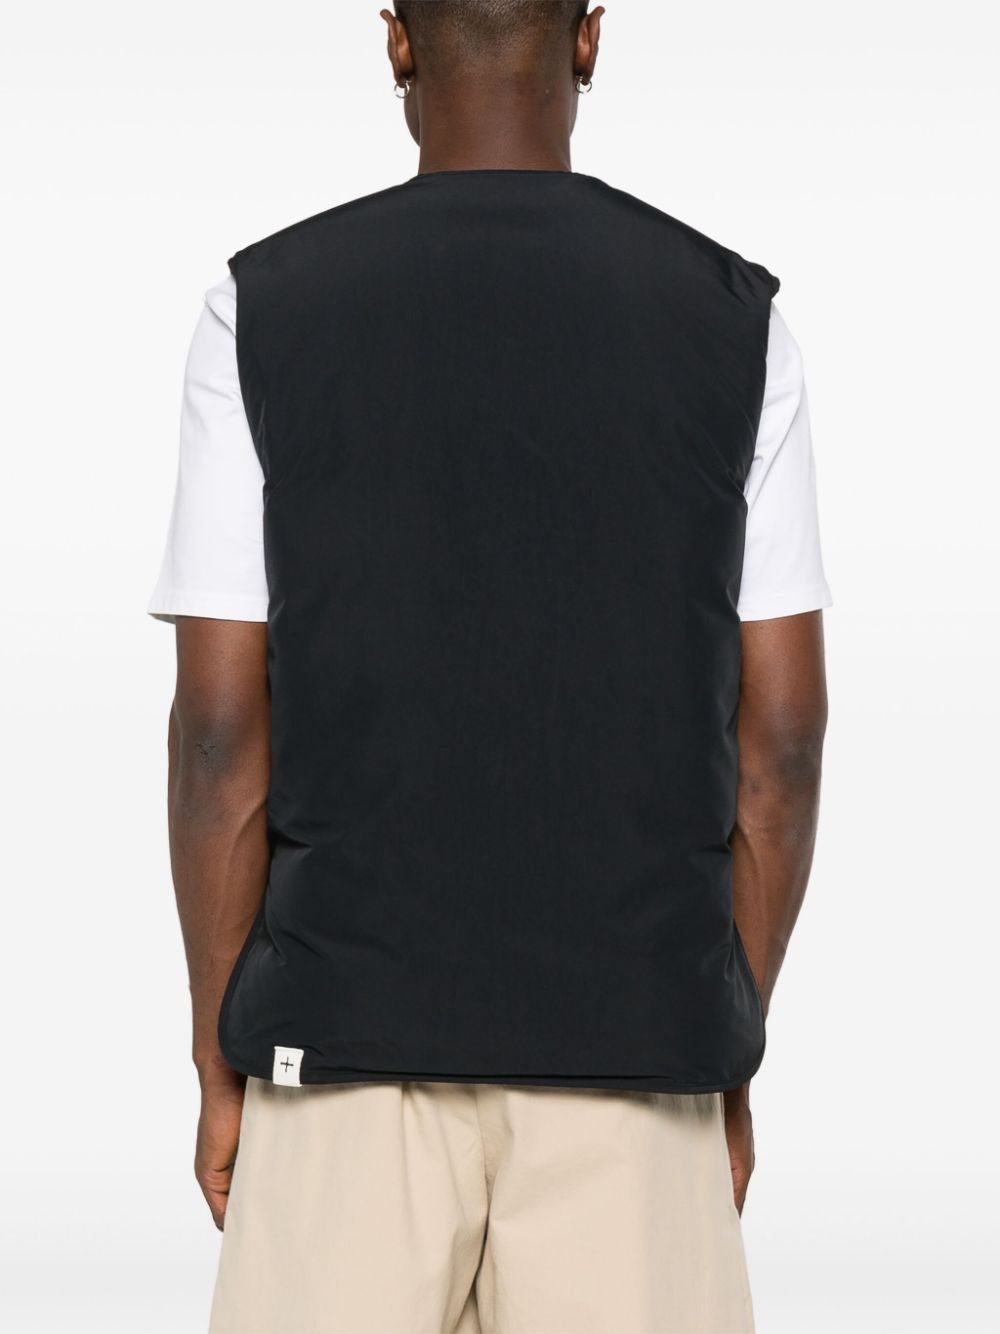 JIL SANDER Men's Black Padded Vest with Recycled Materials and Sustainable Design for SS24